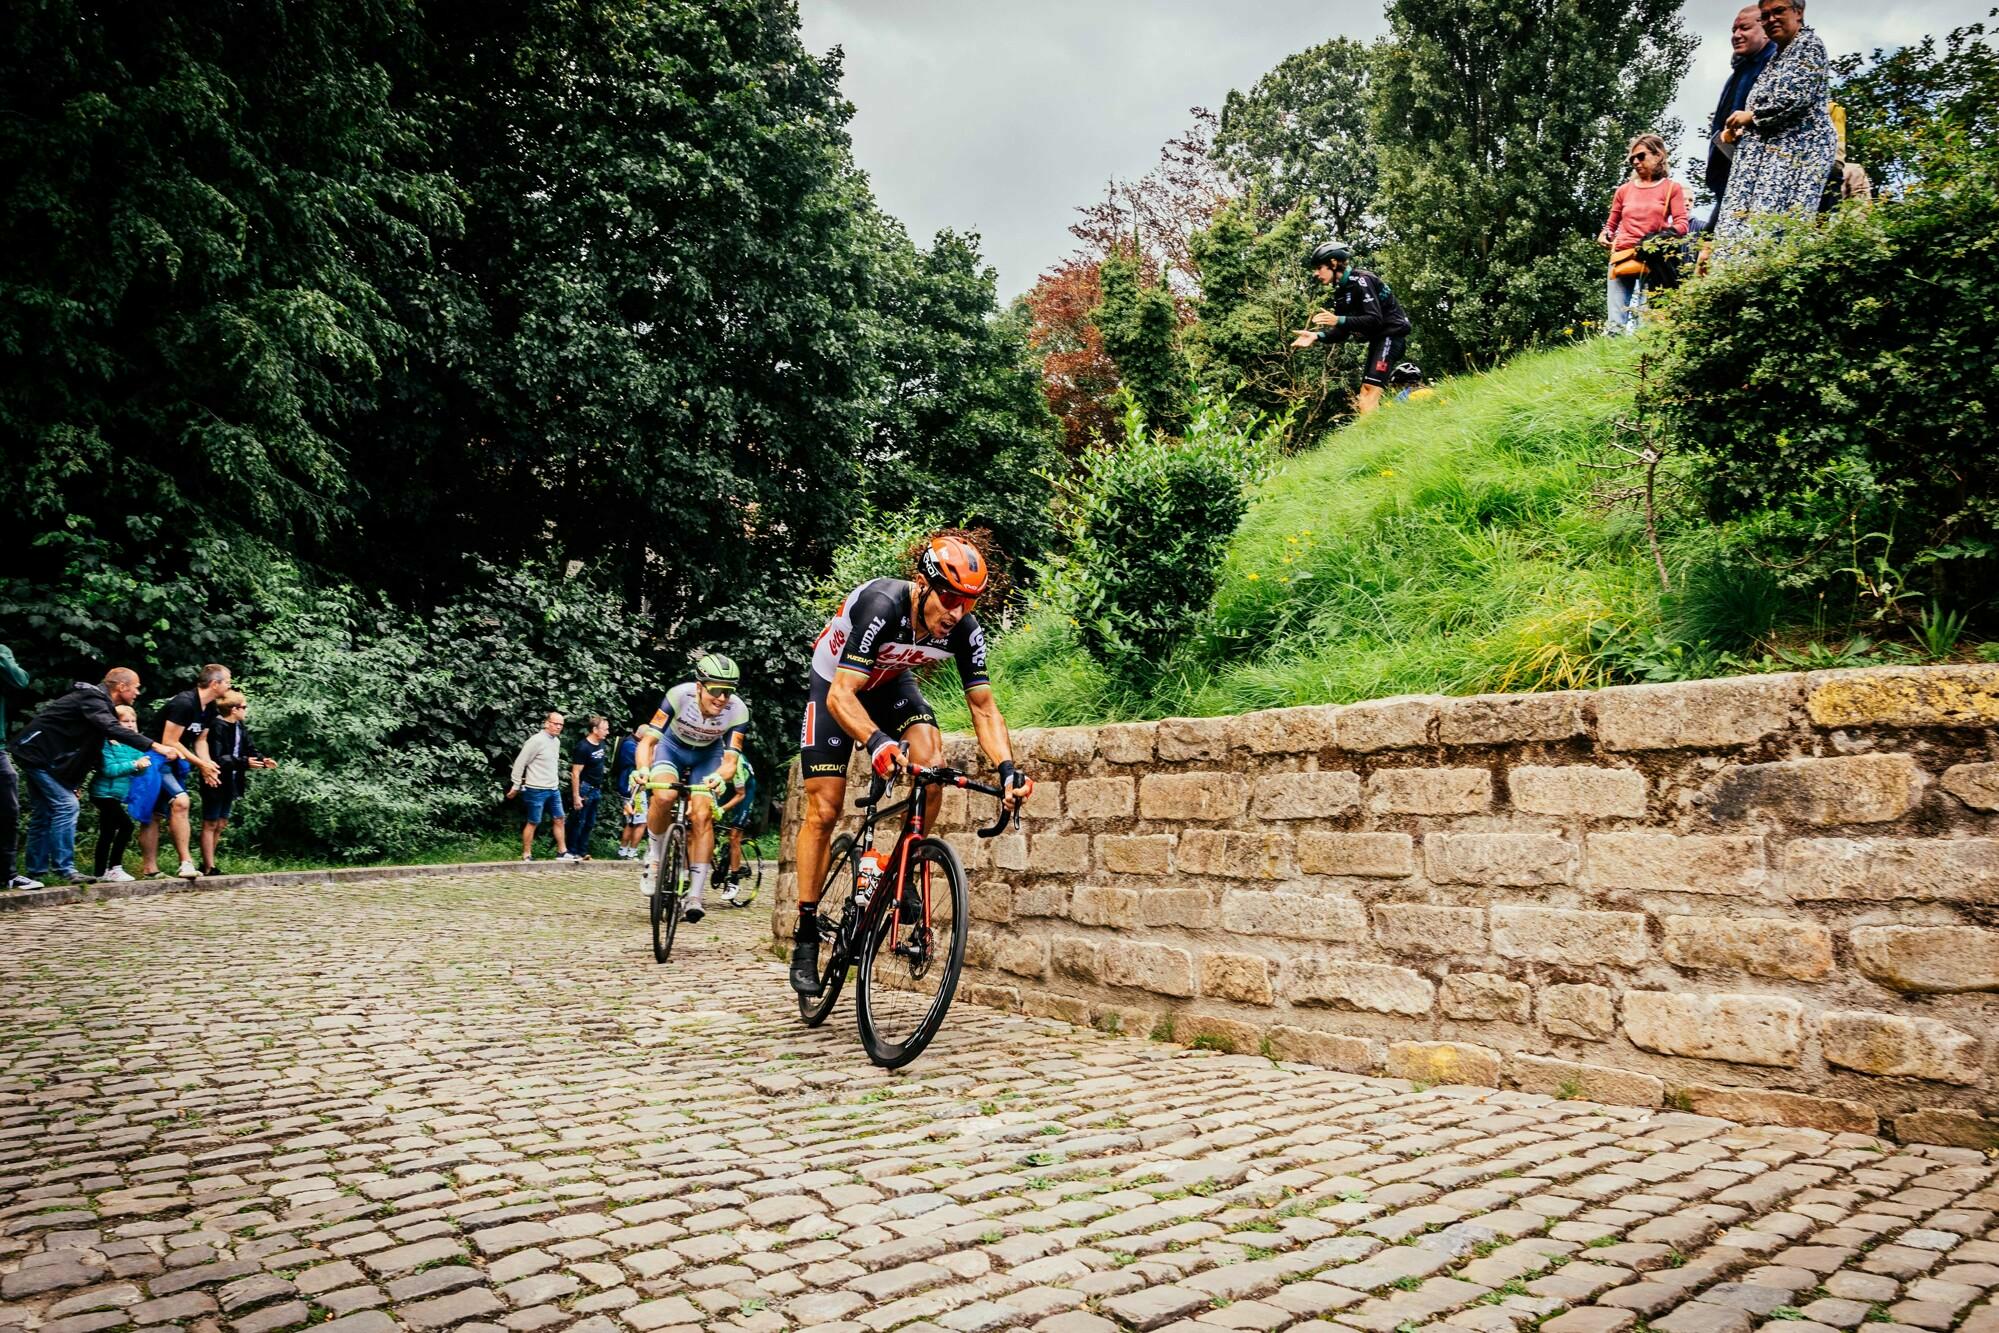 Brussels Cycling Classic welcomes double passage of Muur and Bosberg